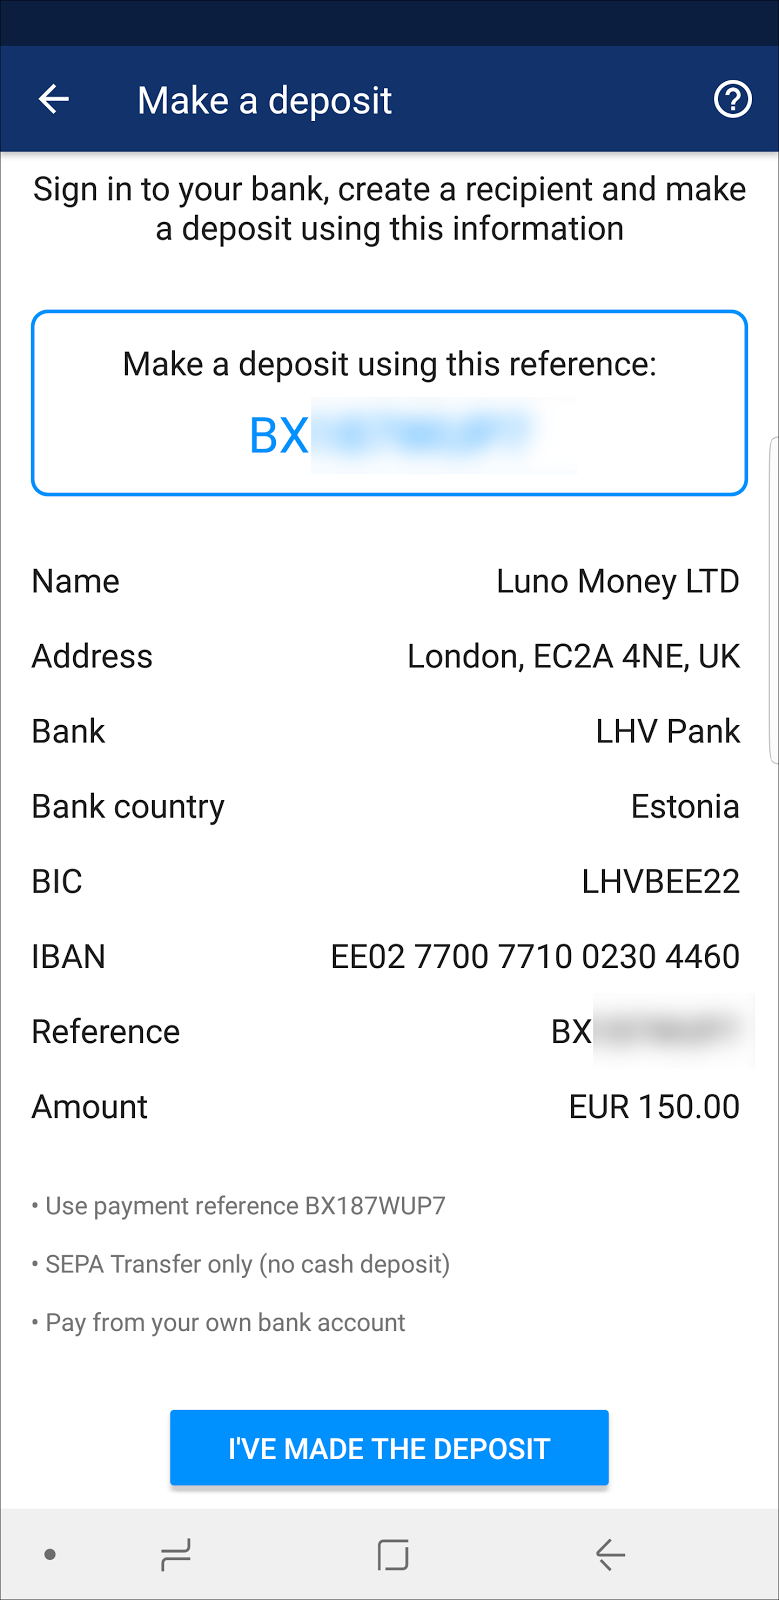 How To Generate Your Bitcoin (And Ethereum) Wallet Address On Luno | DILLIONWORLD